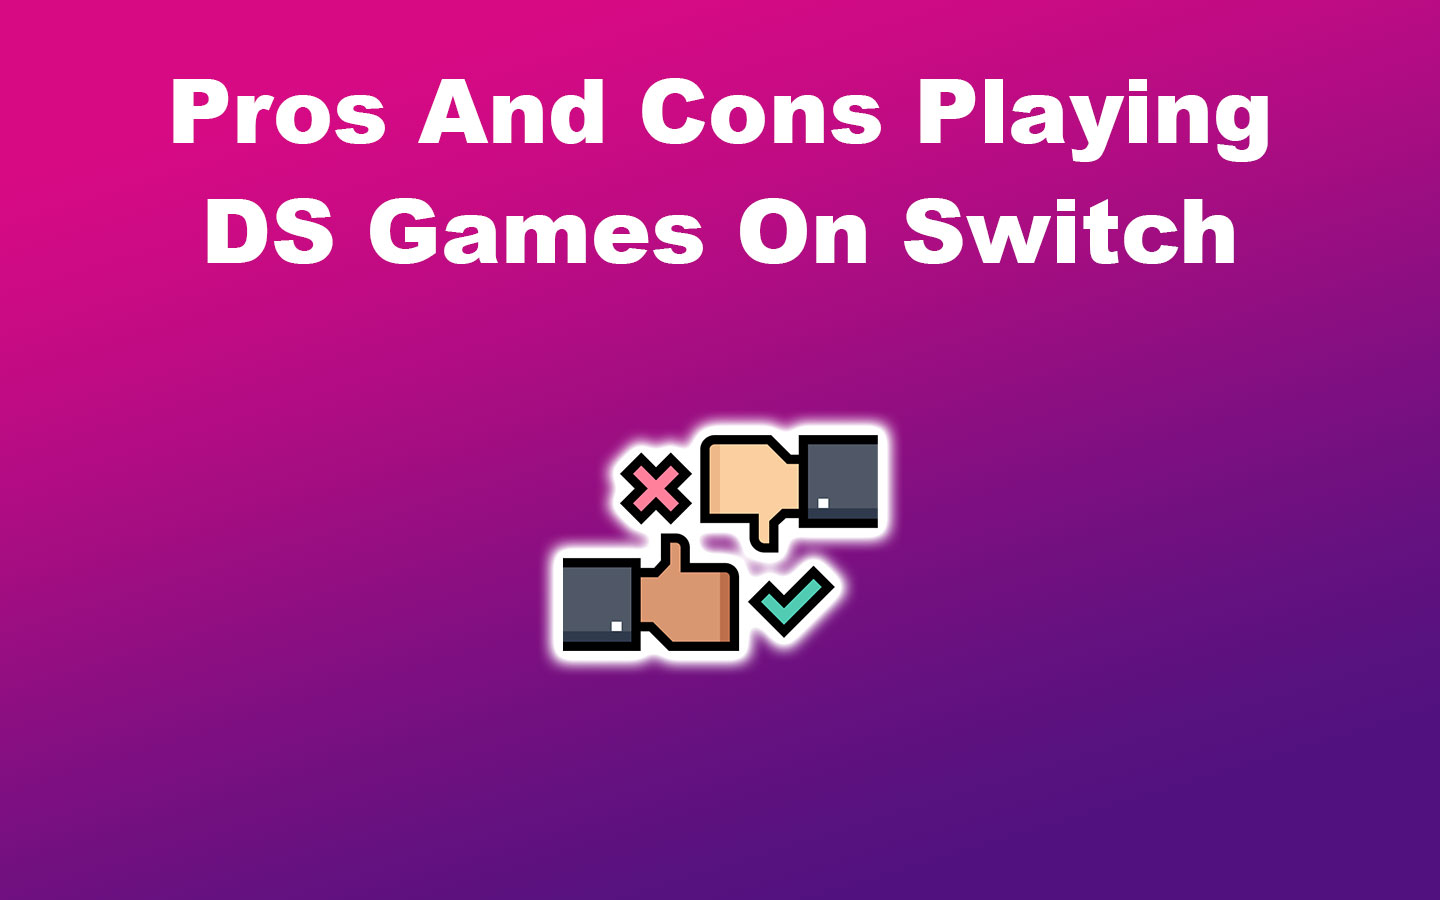 Pros And Cons Playing DS Games On Switch